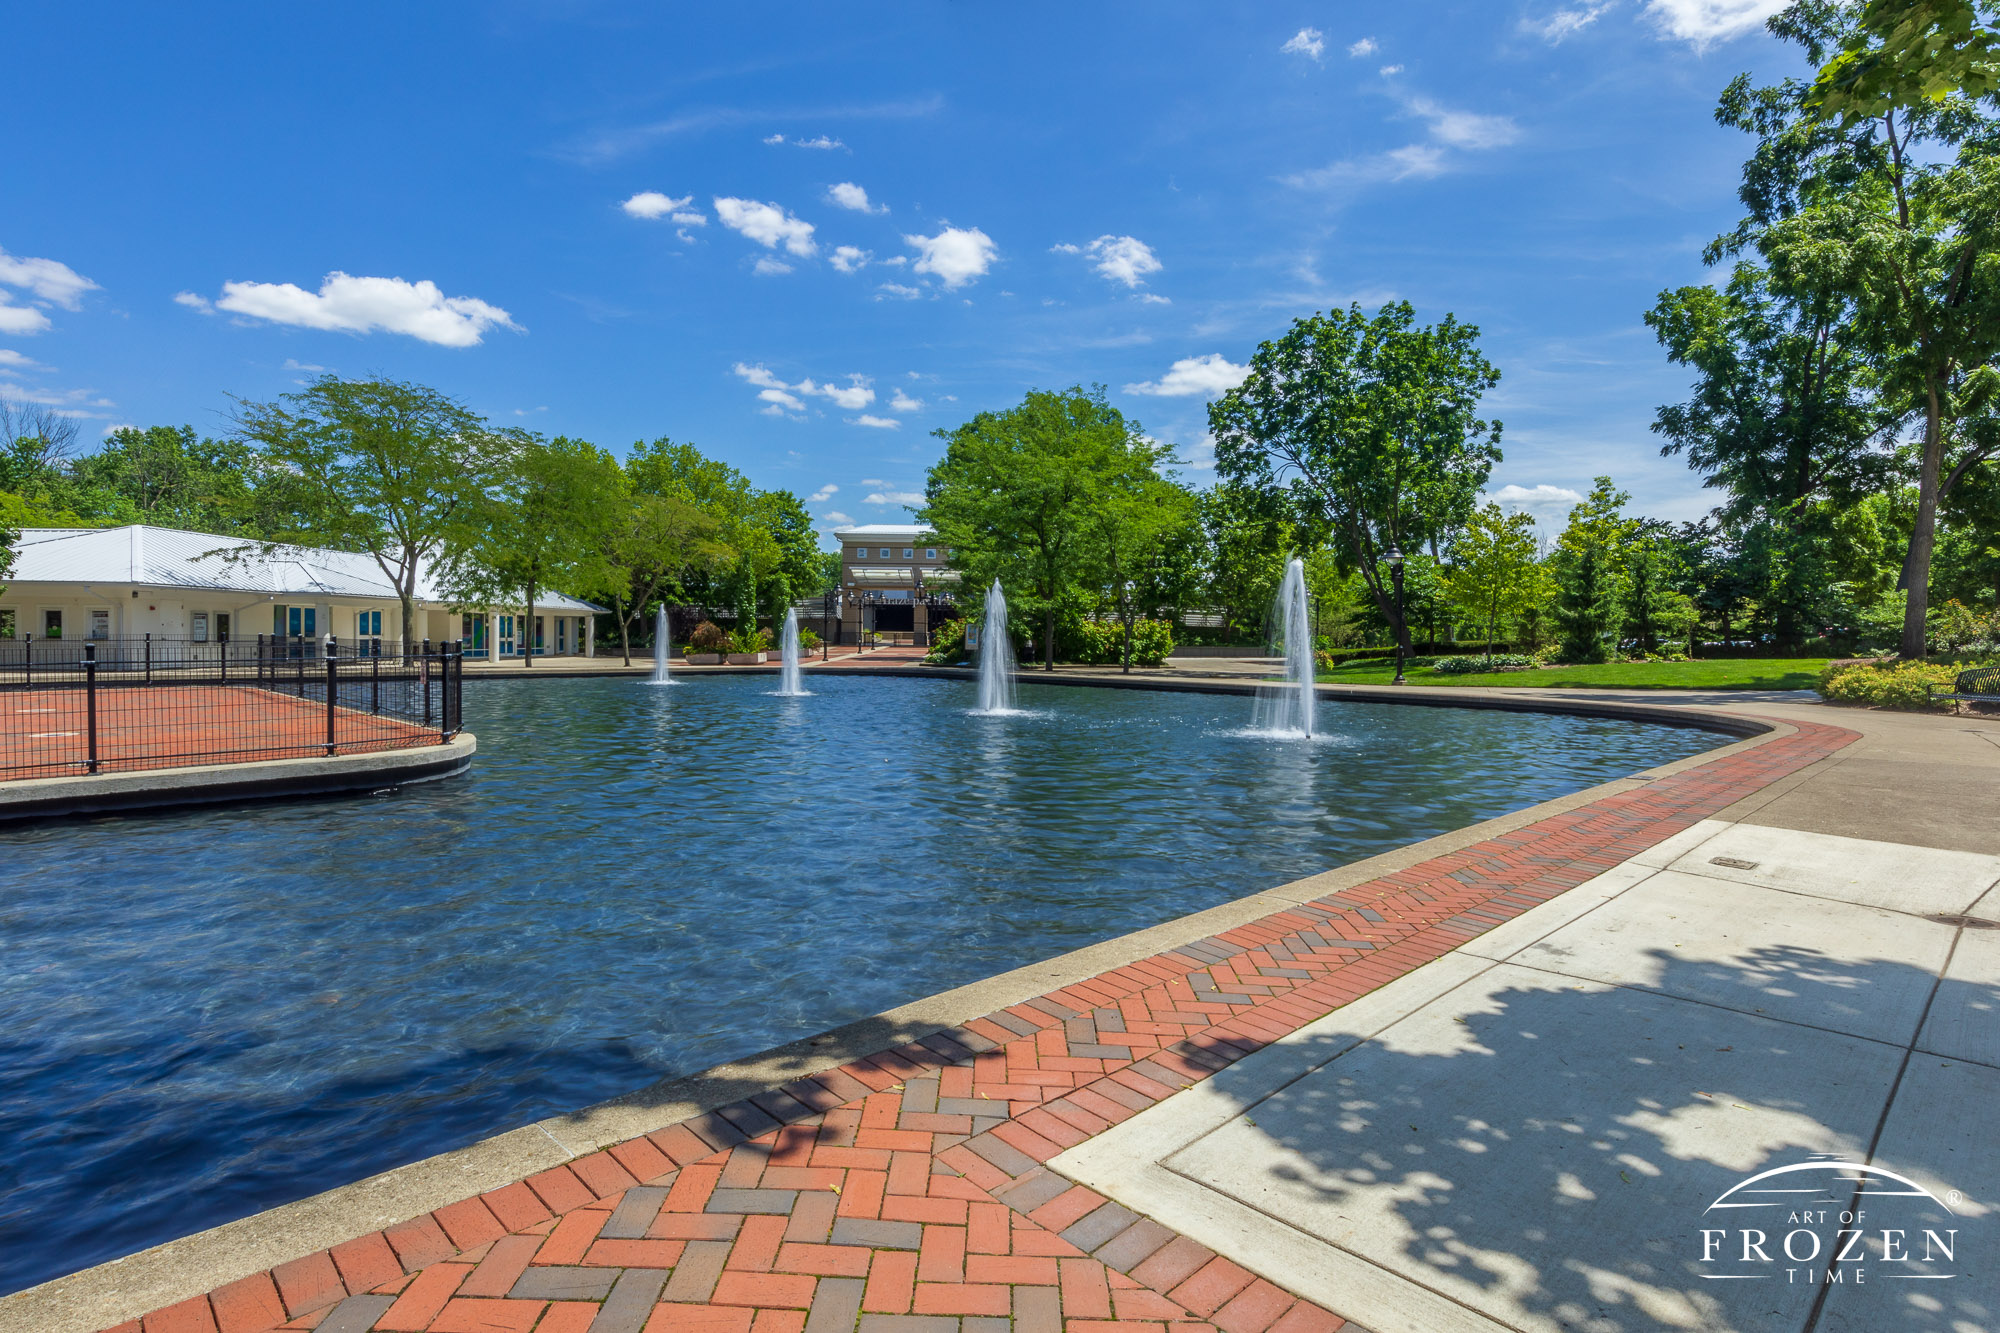 A peaceful park scene where the Fraze Pavilion Fountains dance under blue skies while filling the park with soothing sounds of splashing water